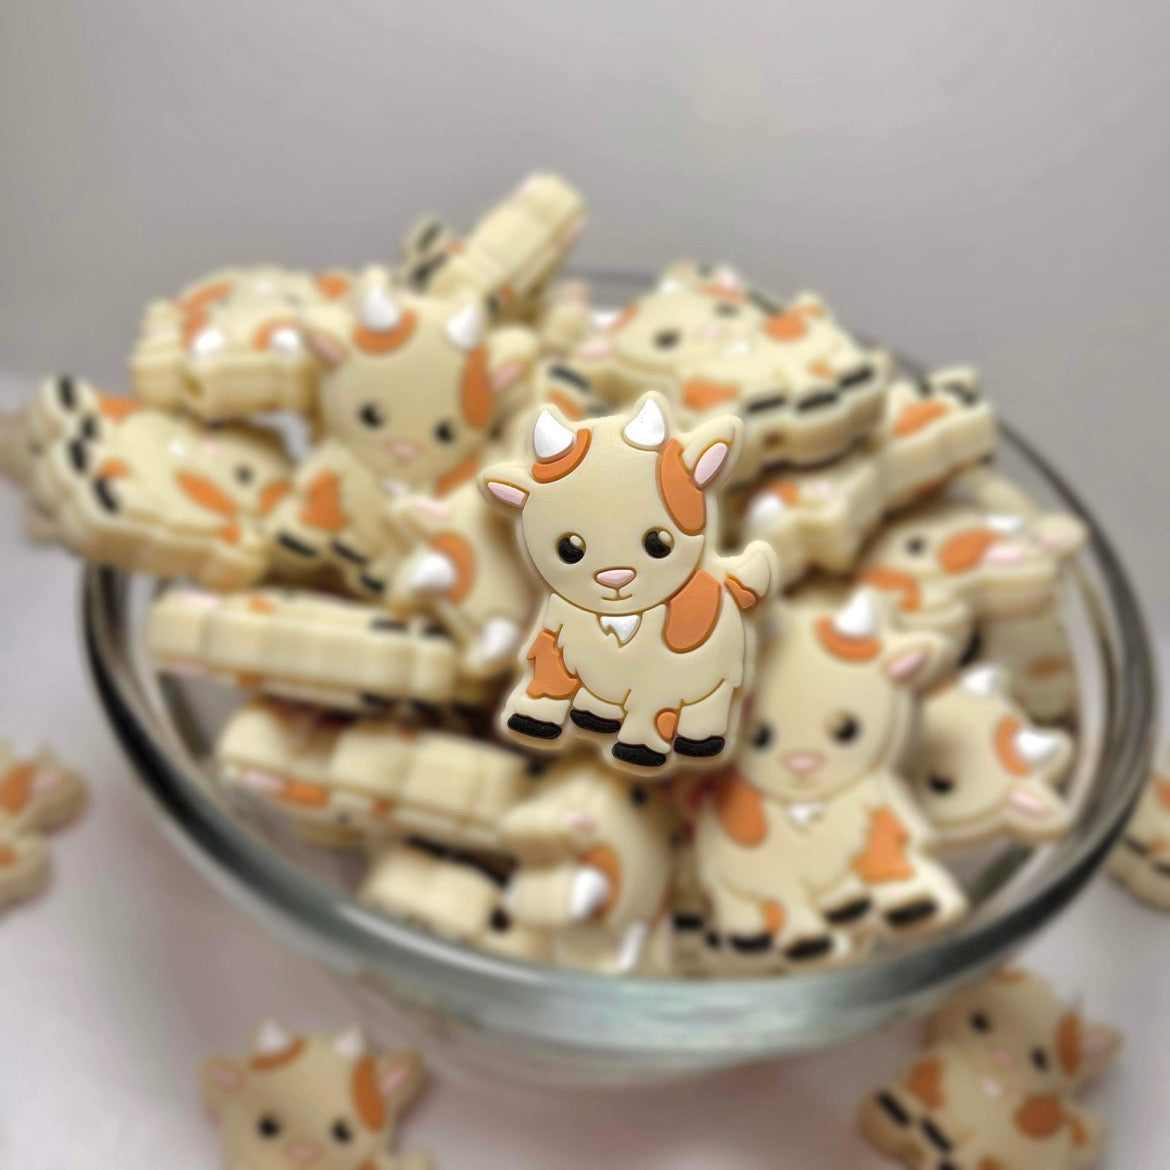 Cute Goat Focal Silicone Beads, Goat Silicone Focals, Silicone Beads, Farm Silicone Beads, Tan Silicone Focal Beads, Farm Animals Silicone Focal Beads, Focal Beads, Focal Silicone Beads, Beads for Crafting